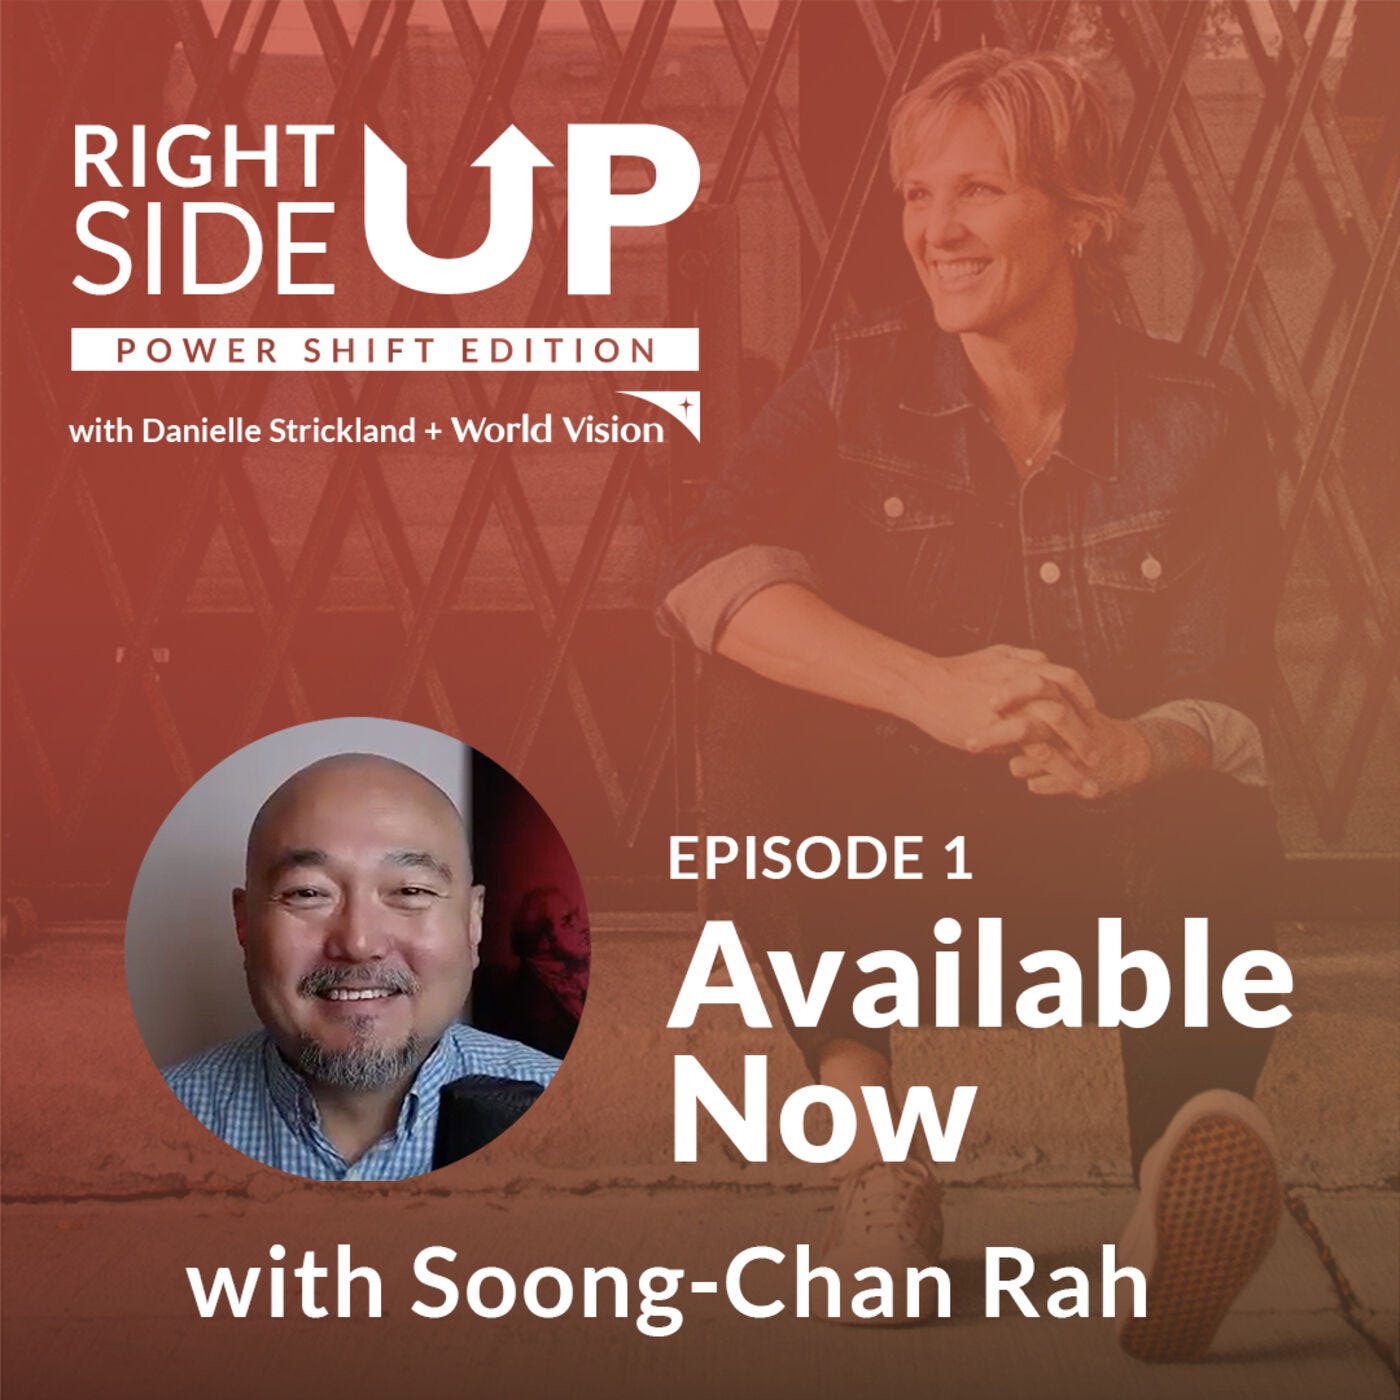 Power Shift Edition: Interview with Soong-Chan Rah